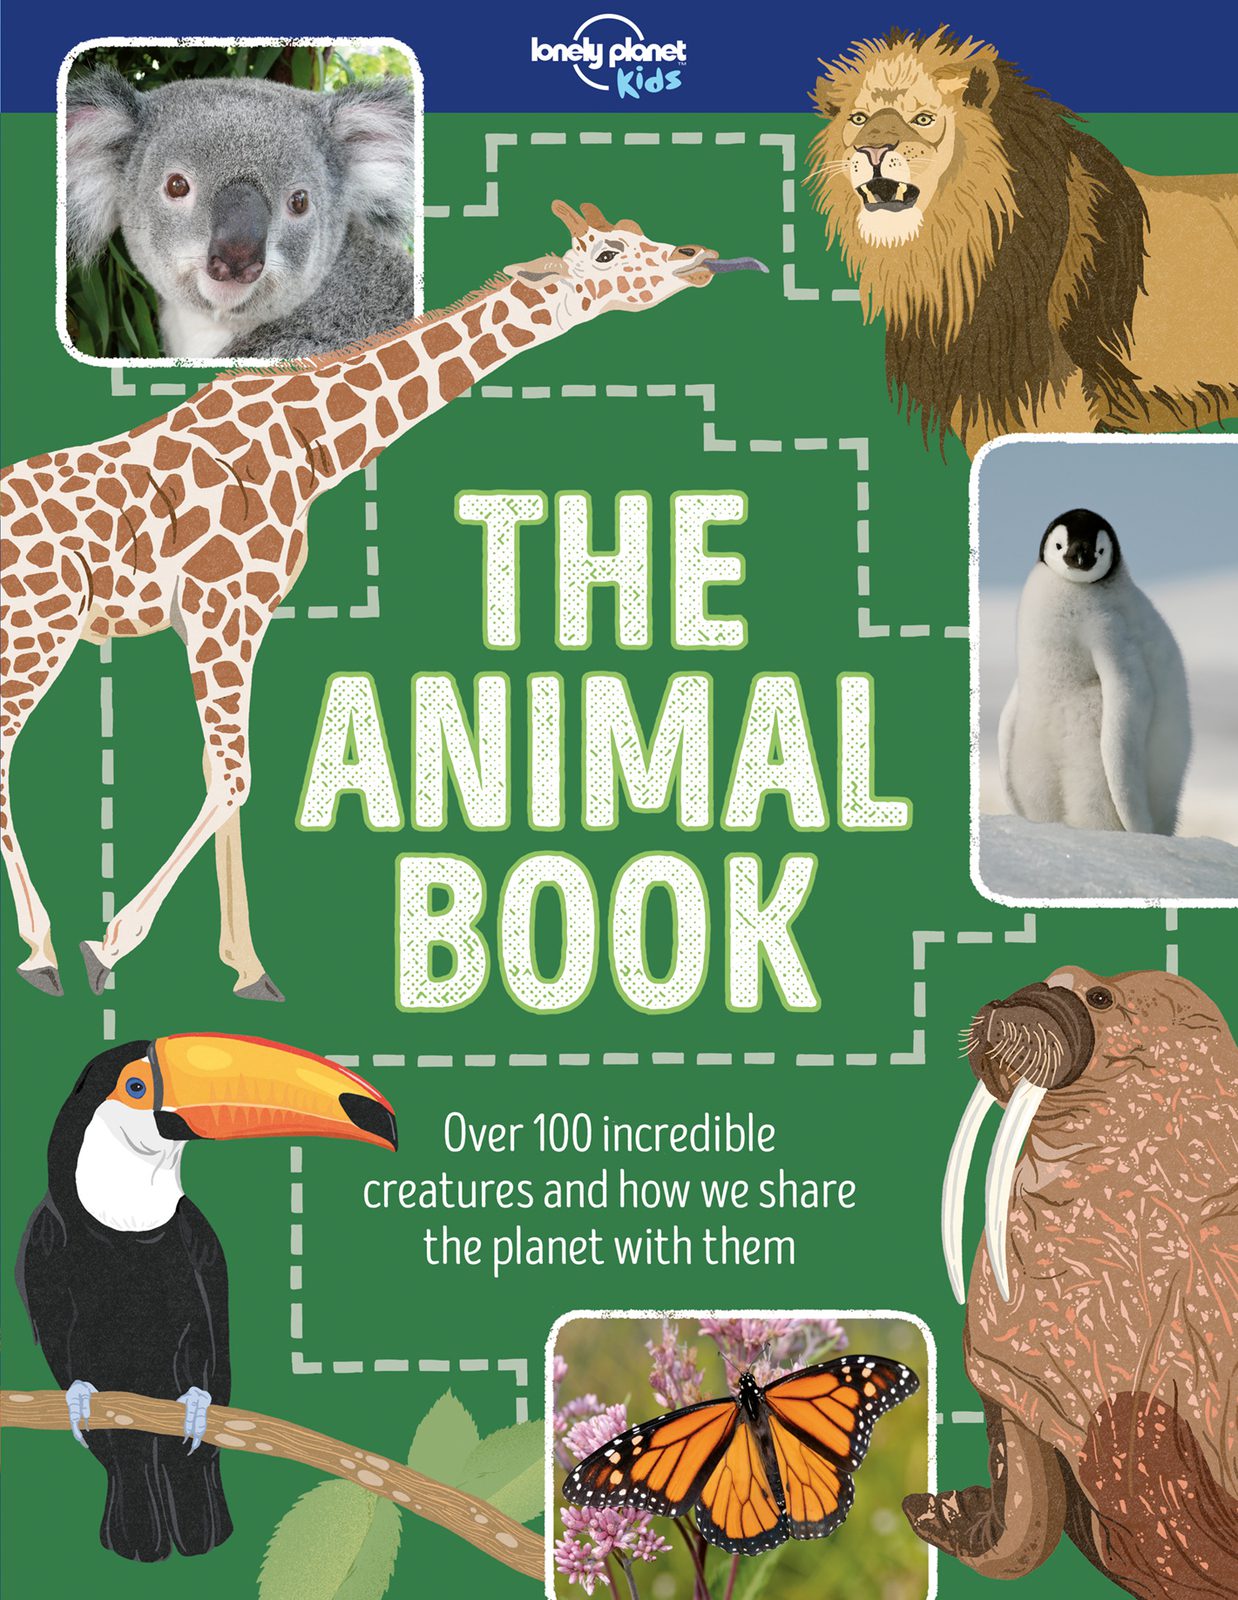 on animals book review